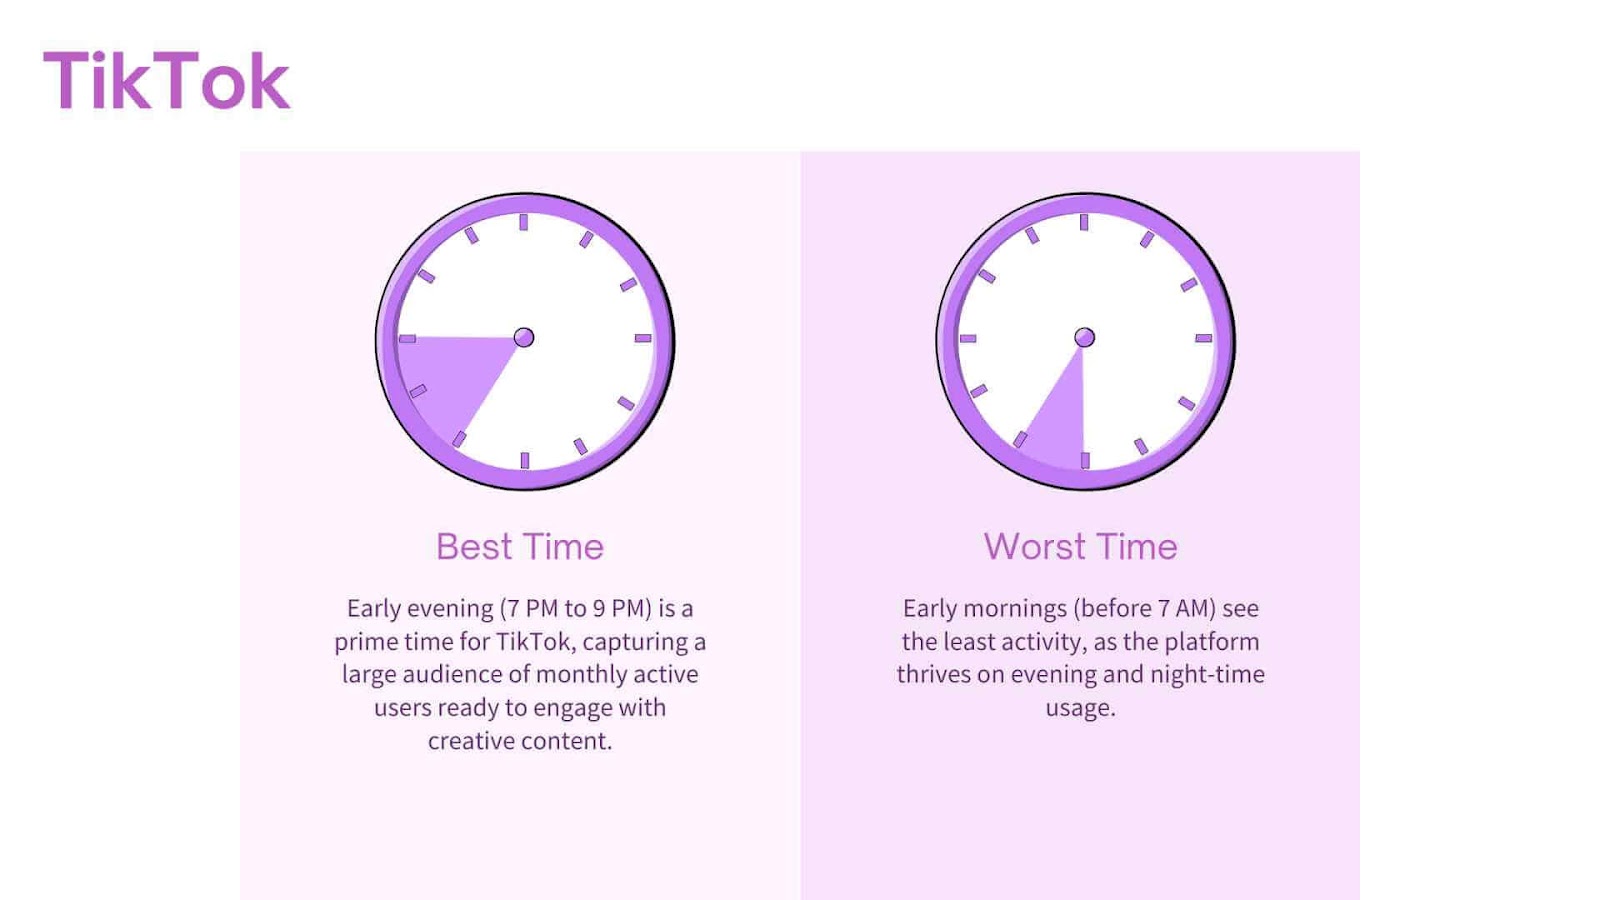 An infographic showing the best and worst times to post on TikTok, with clocks representing early evening and early morning hours.